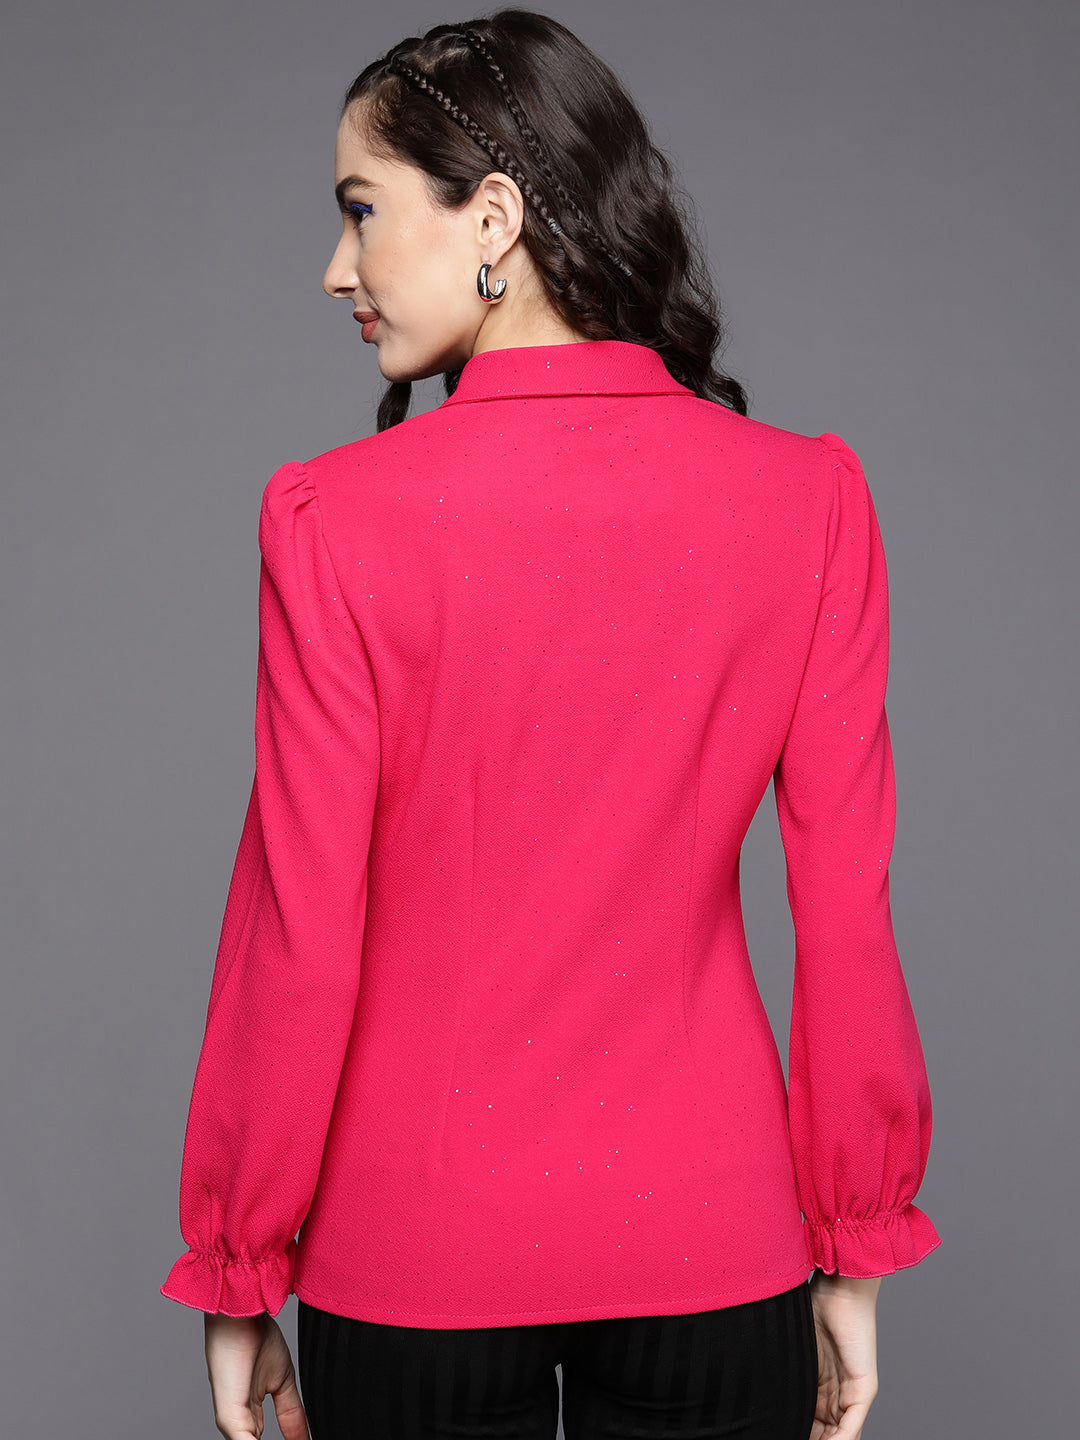 Women Fuchsia Shimmer Fitted Ruched Shirt